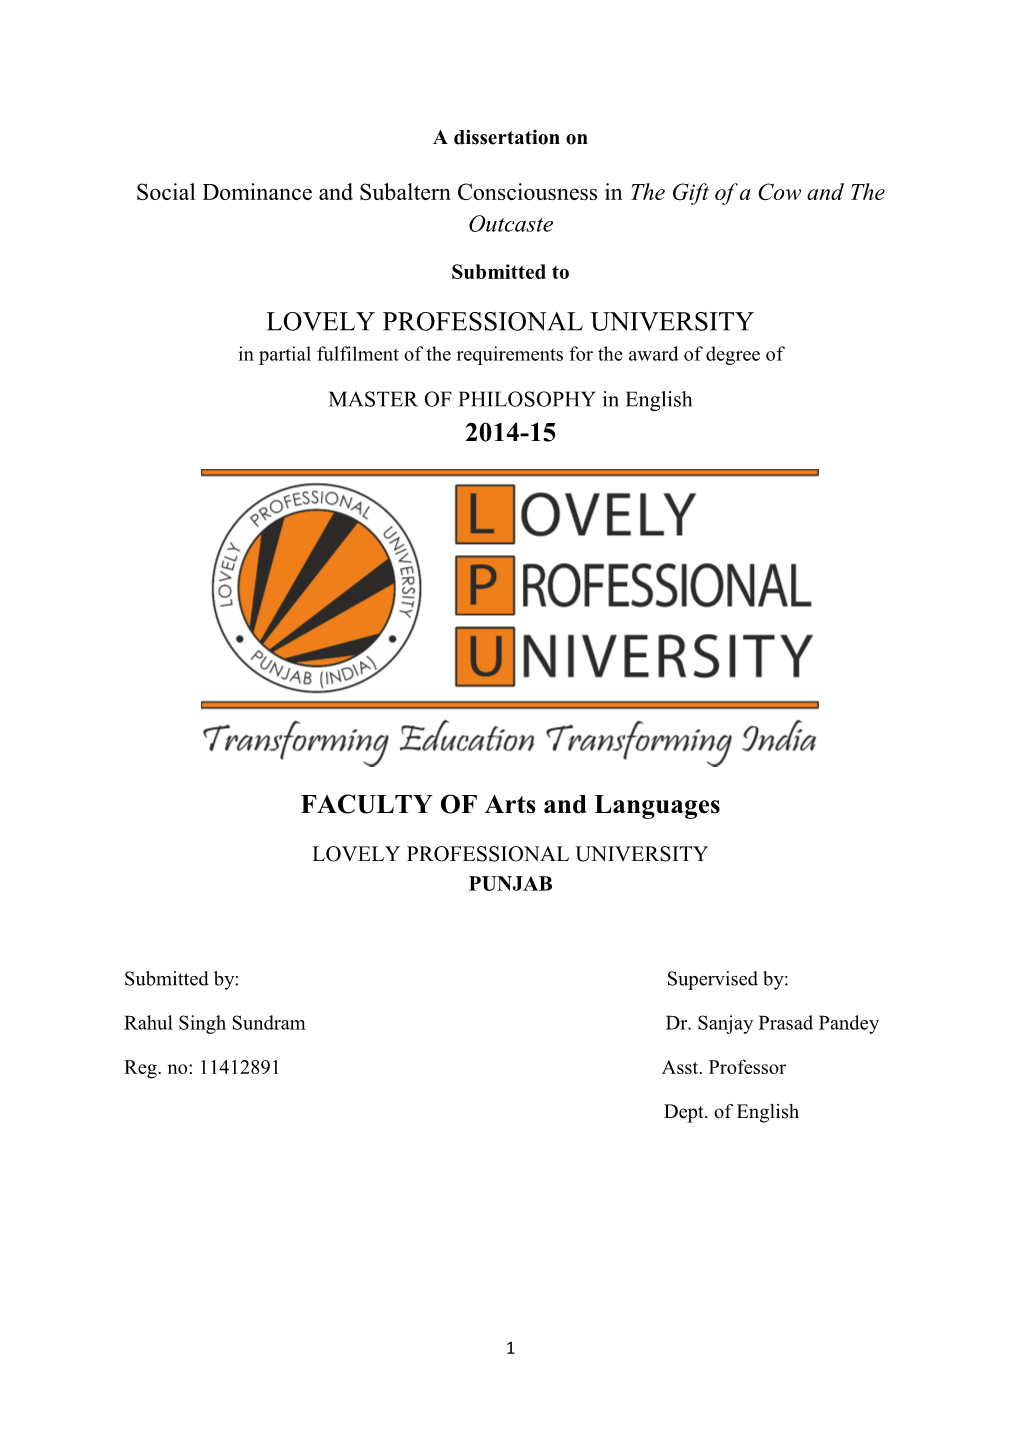 LOVELY PROFESSIONAL UNIVERSITY 2014-15 FACULTY of Arts and Languages